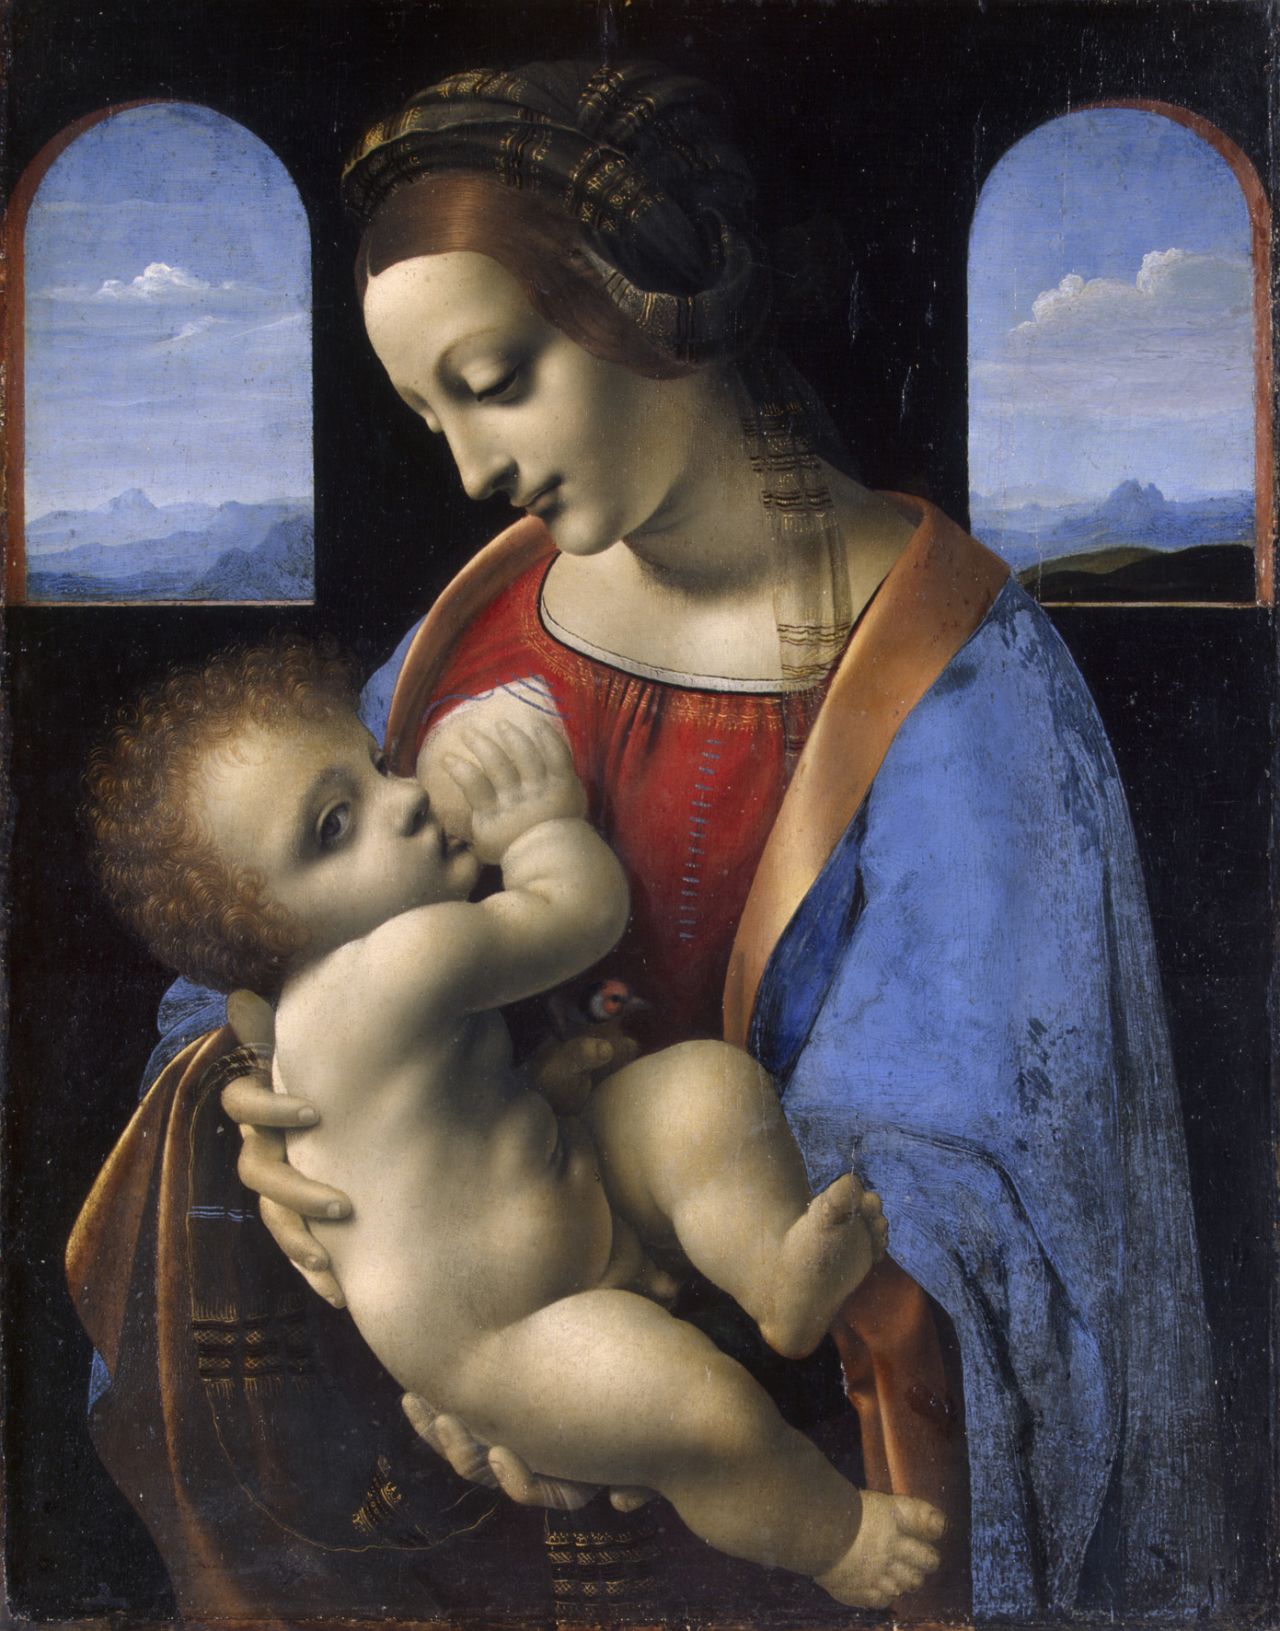 The Virgin and Child ("The Madonna Litta") (c.1491-5)